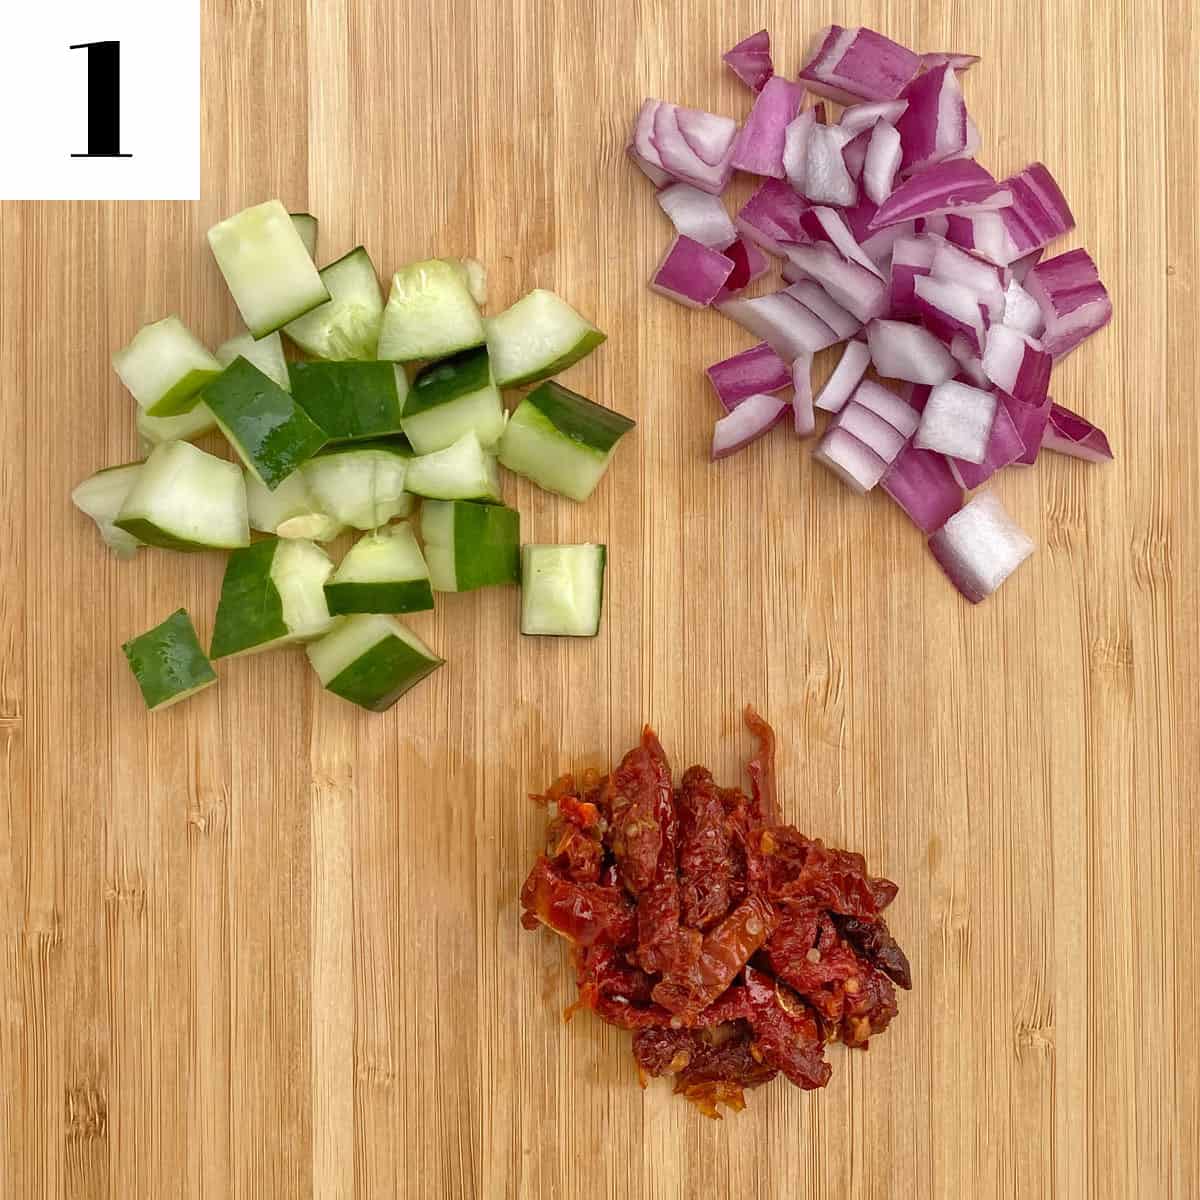 chopped cucumbers, sun-dried tomatoes, and red onion on a wooden cutting board